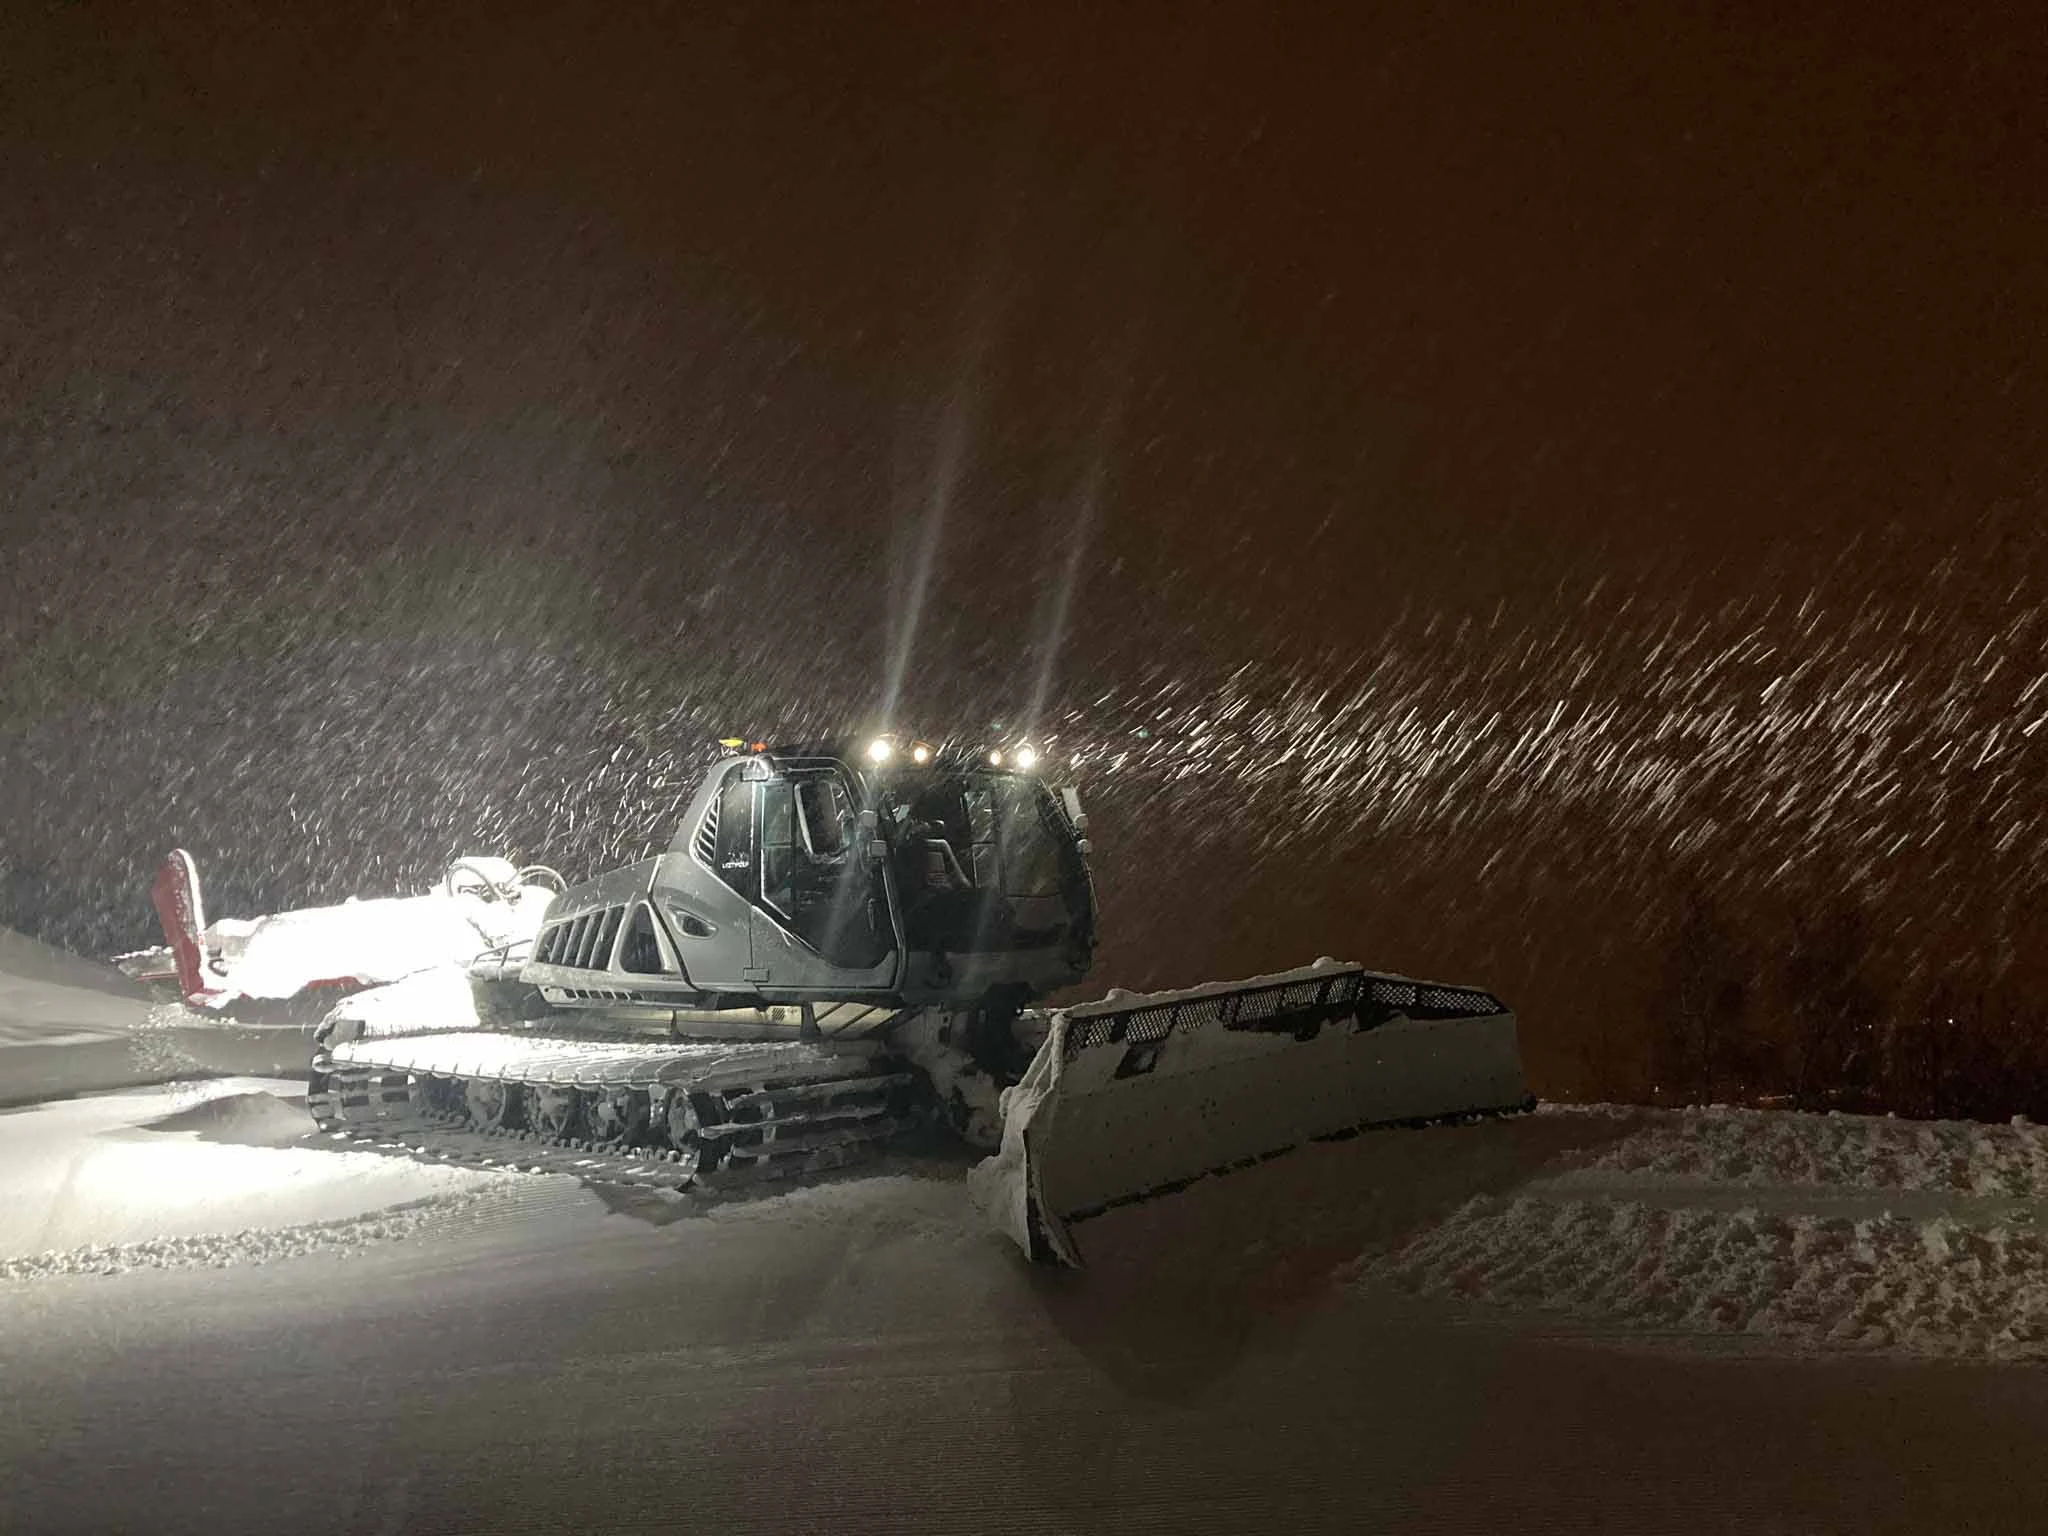 a piste basher at night, under light snow